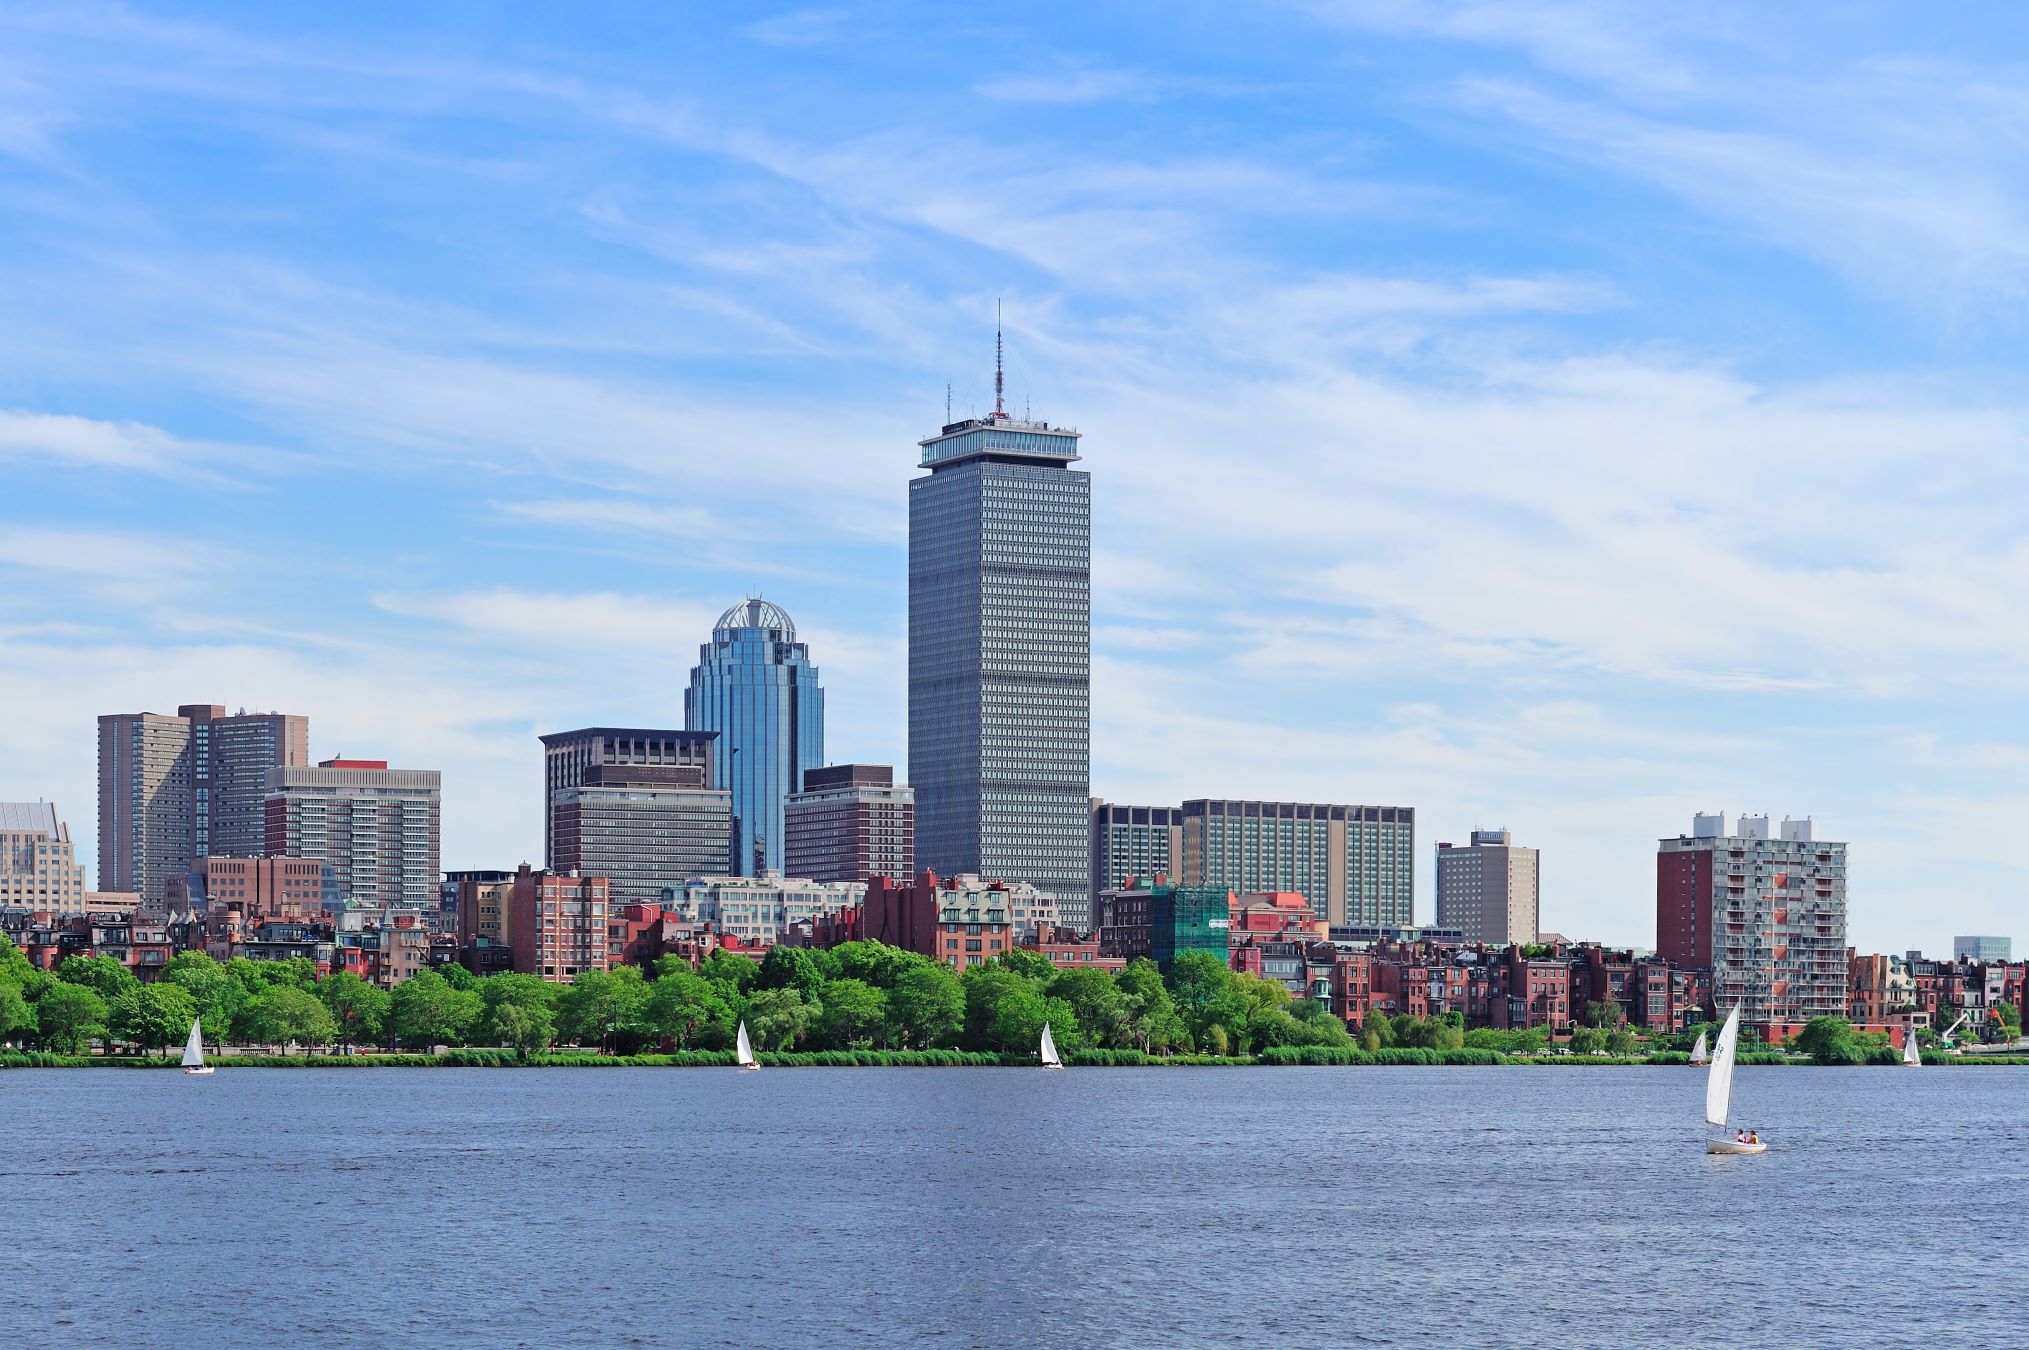 Prudential Center & Copley Place, Boston - Times of India Travel